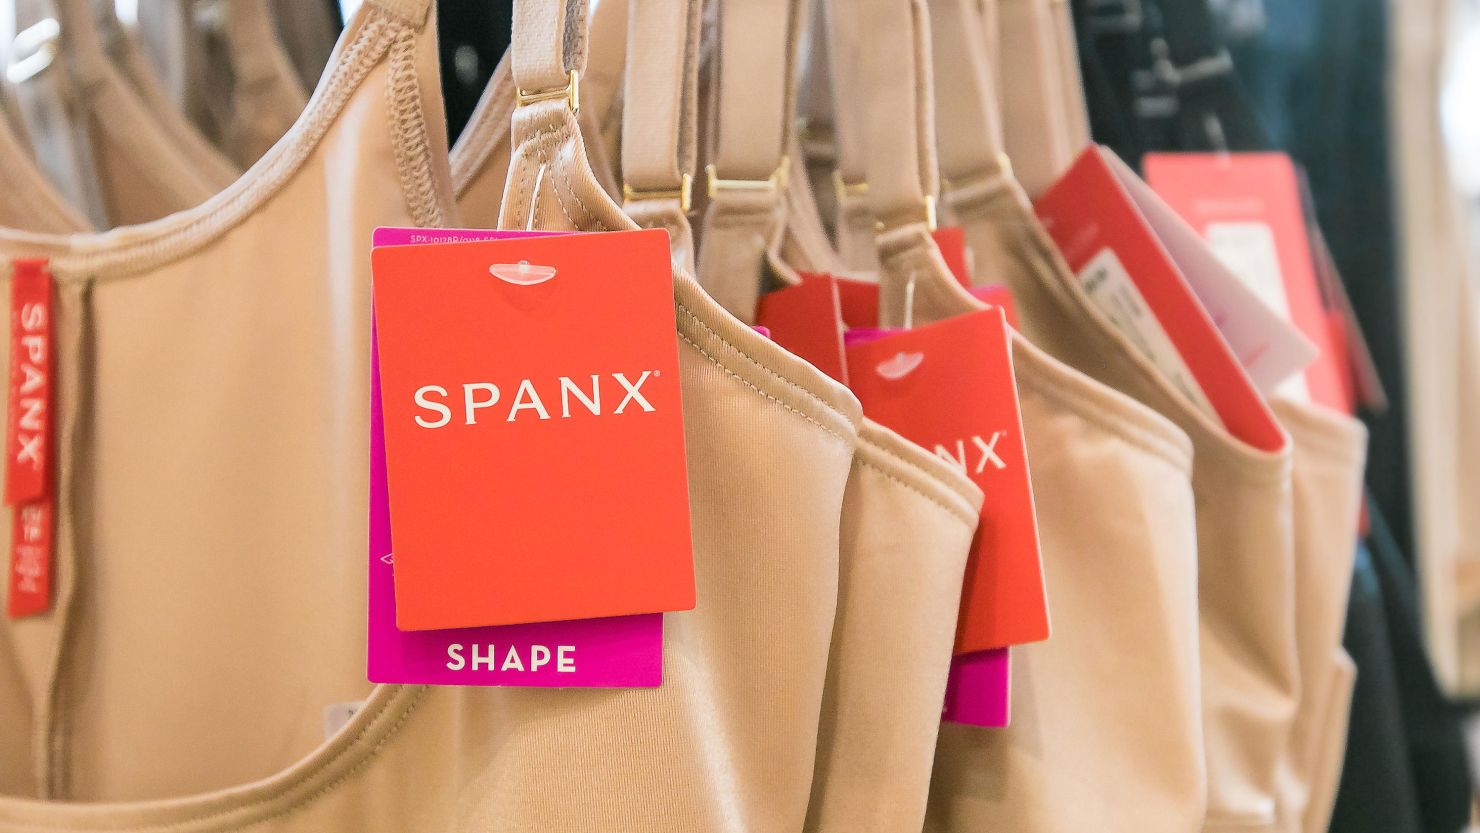 Spanx, the shapewear brand, valued at $1.2 billion in Blackstone deal